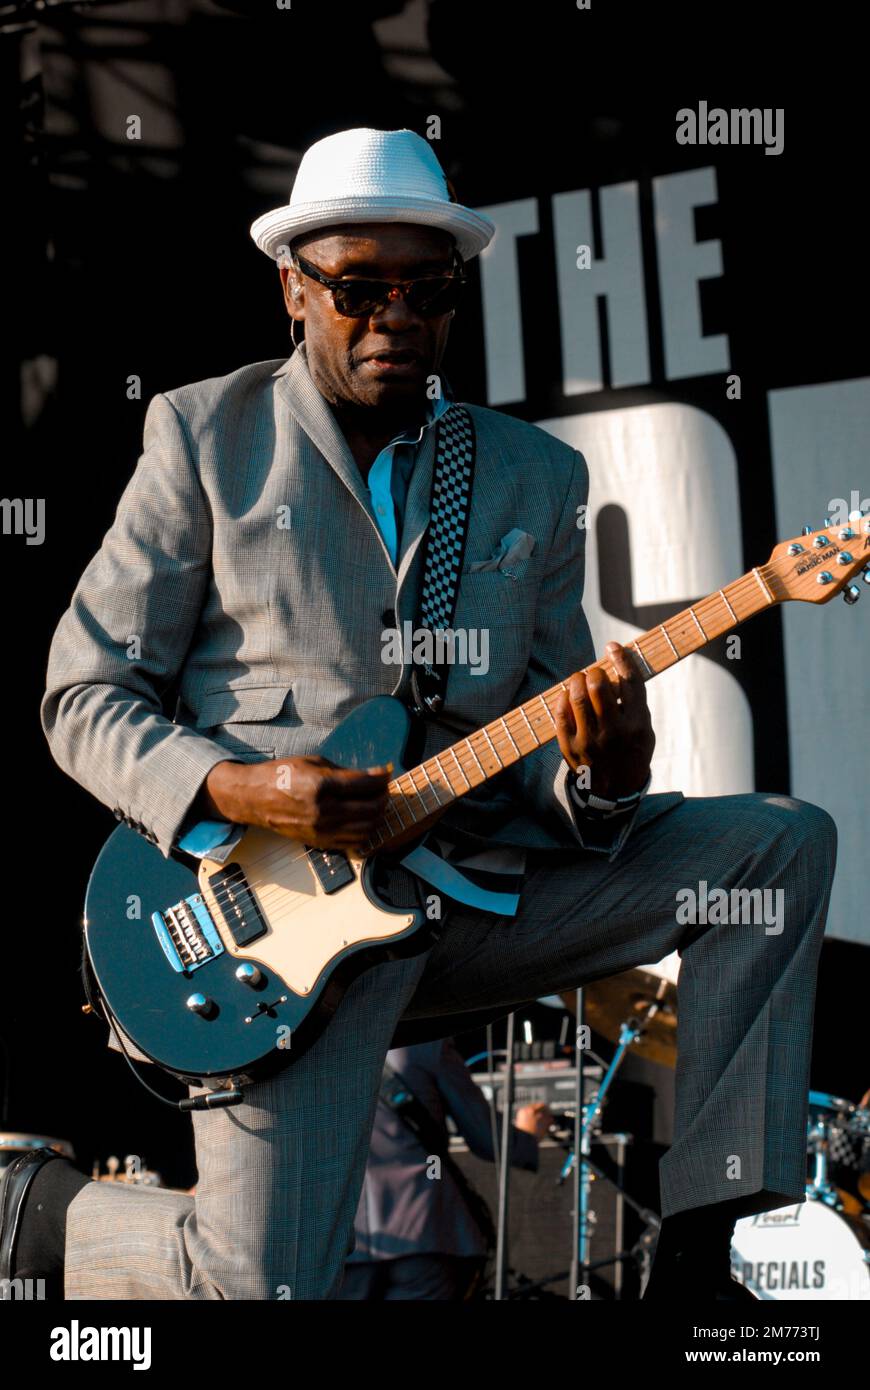 Lynval Golding - The Specials, V2008, Hylands Park, Chelmsford, Essex, Britain - 22 August 2009 Stock Photo